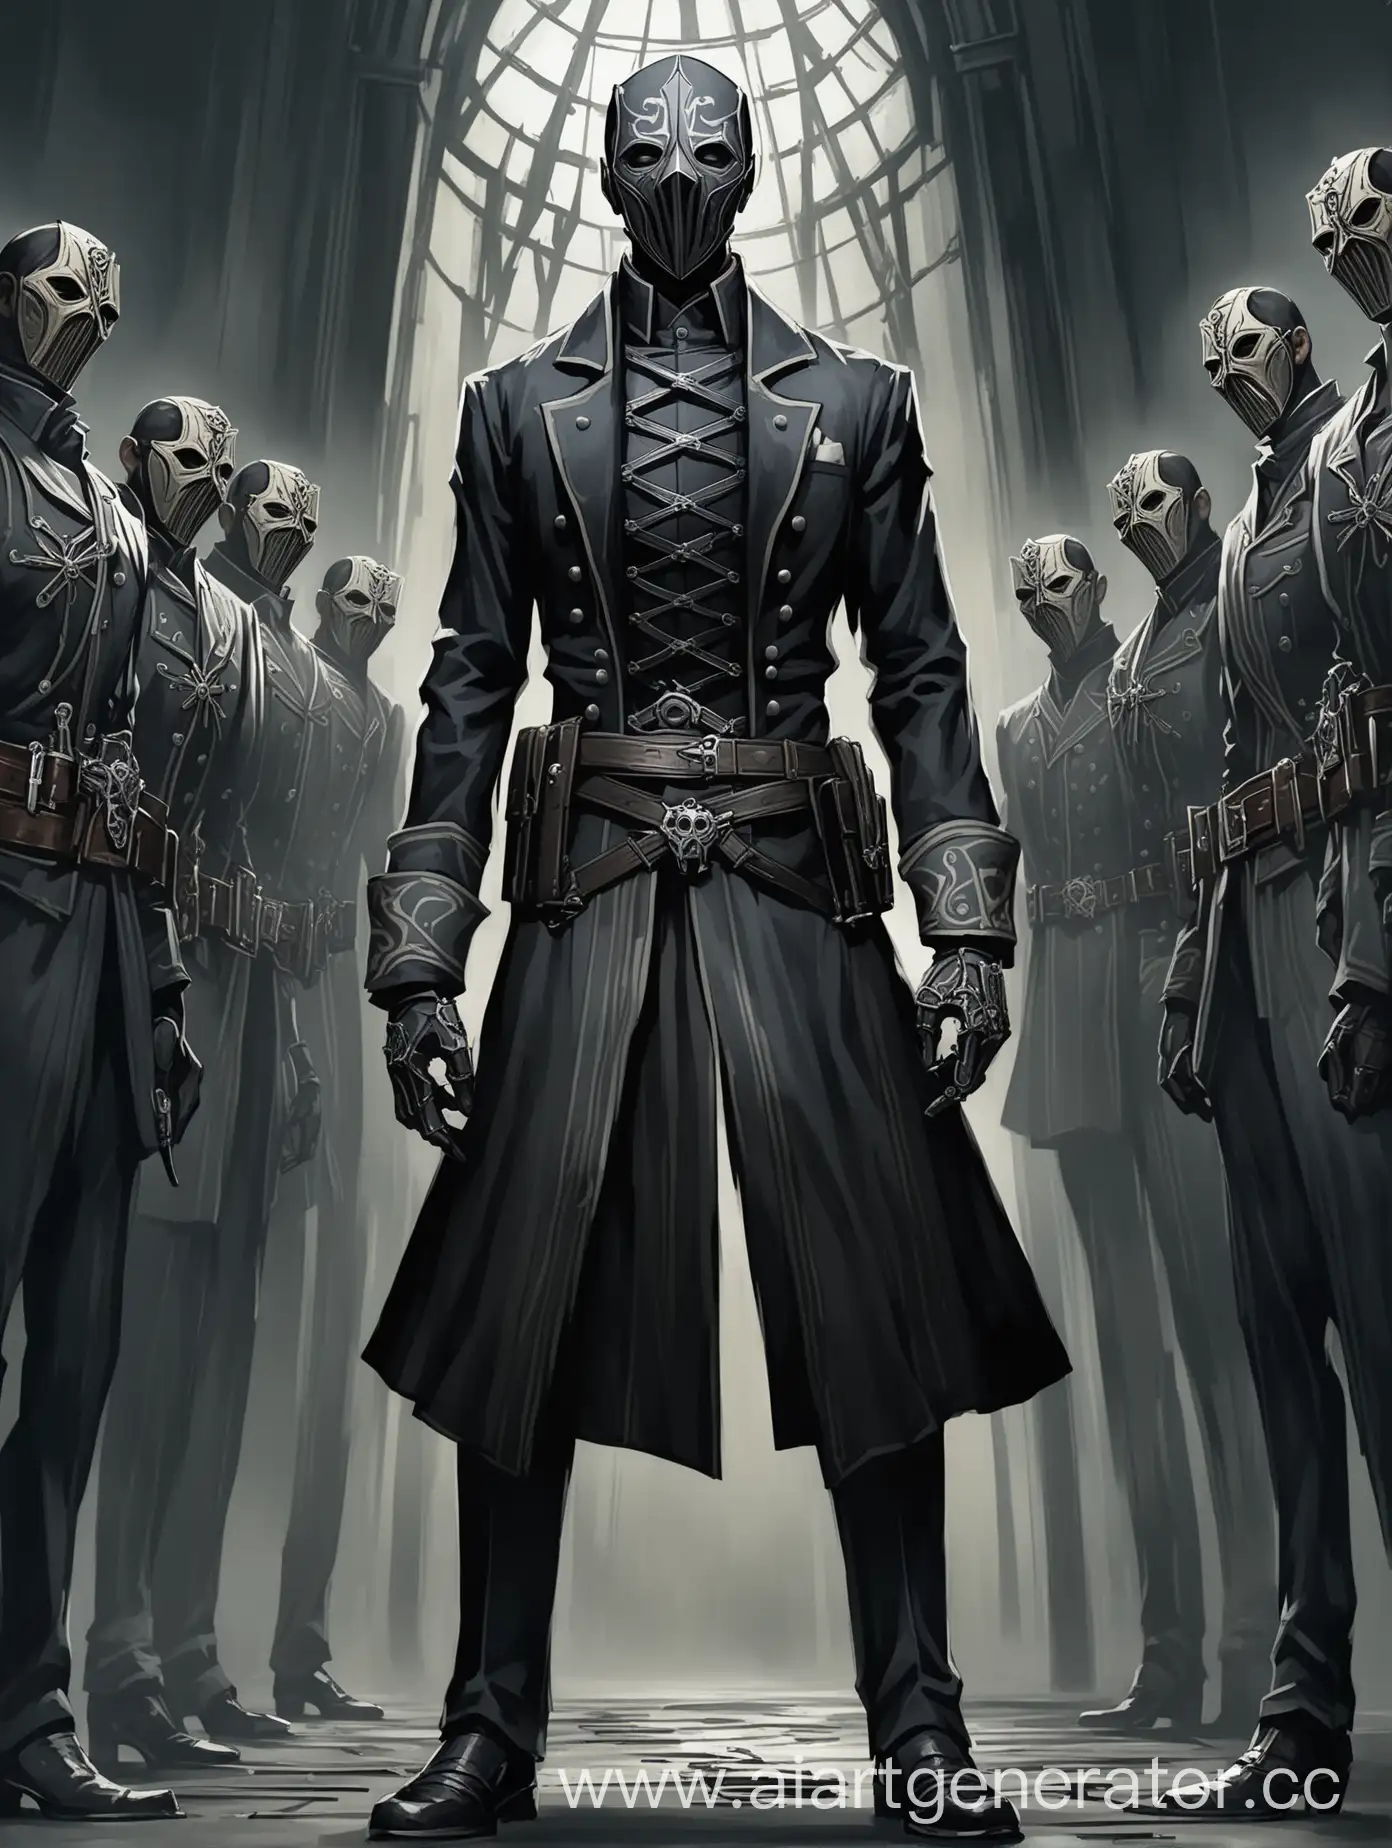 A strong man with a rather slender figure, dressed in a uniform similar to that of the Watchers from Dishonored, however, his clothing is distinguished by a large number of belts. A steel mask is worn on the face, expressing the emotion "Calm".